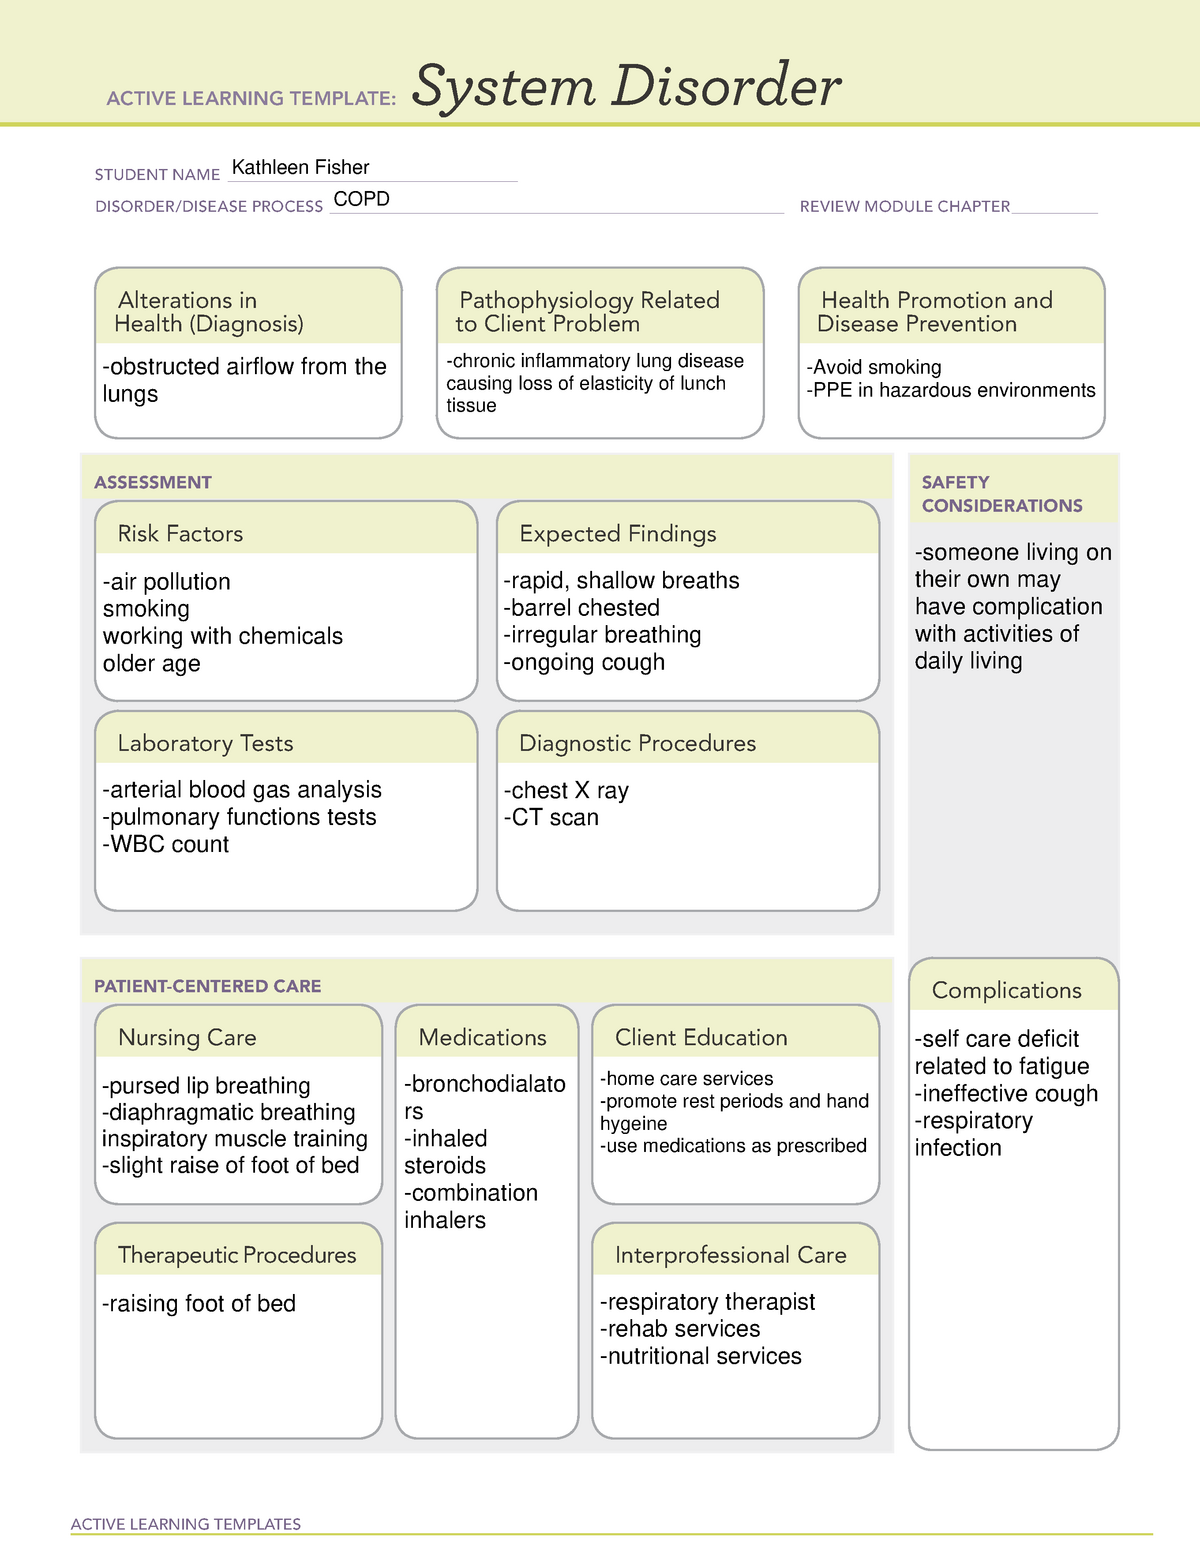 COPD stystemdistemp ATI template ACTIVE LEARNING TEMPLATES System